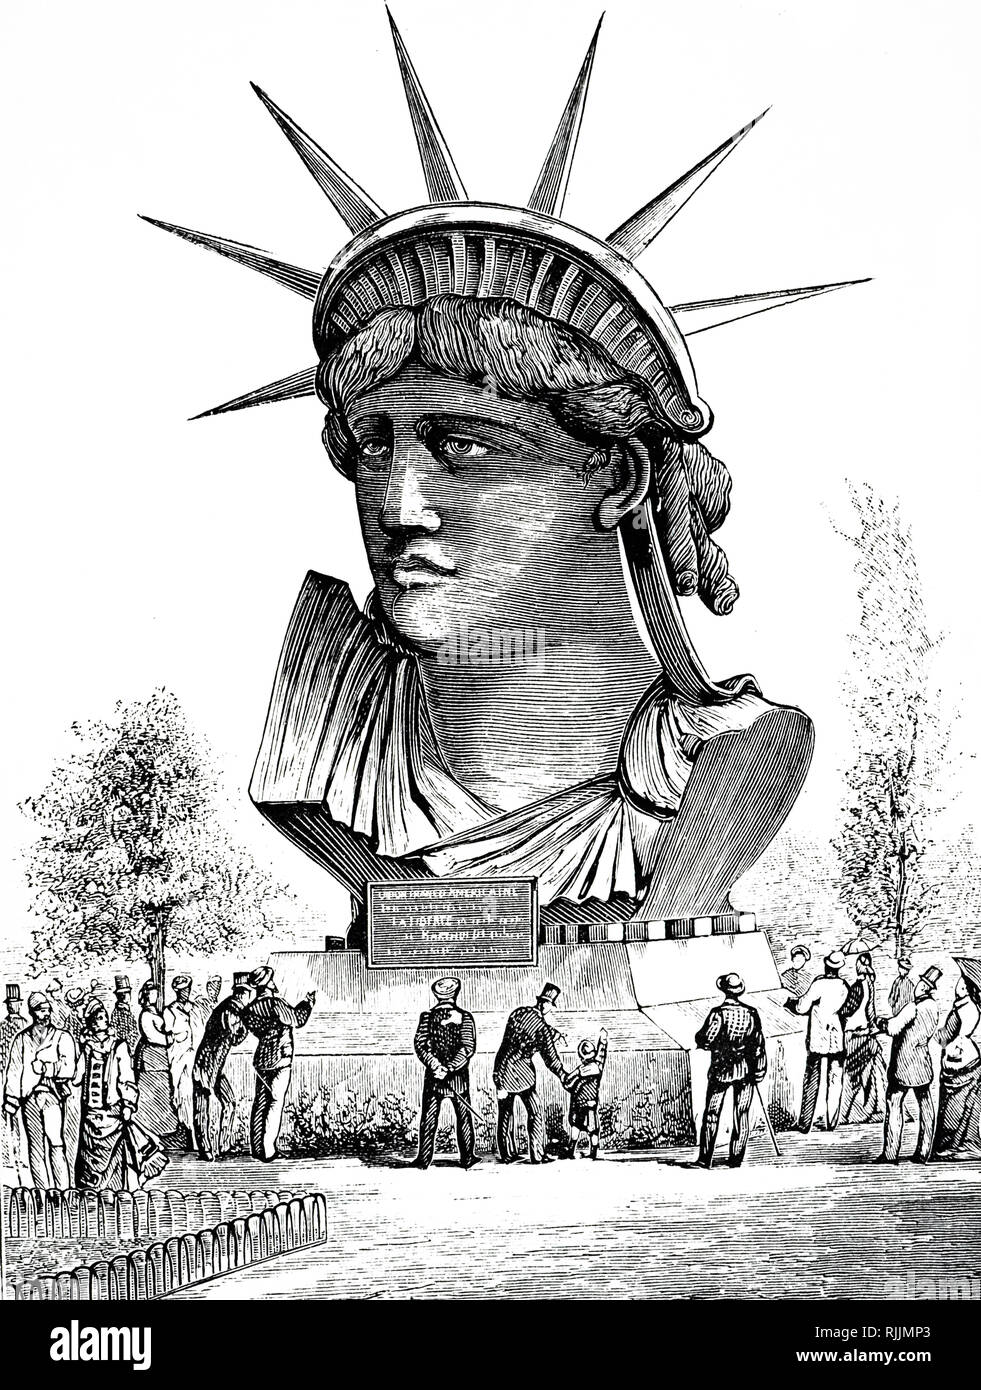 Engraving depicting the head of the Statue Of Liberty France, designed by French sculptor Frederic Auguste Bartholdi. The statue was dedicated to America on October 28, 1886. Dated 19th century Stock Photo